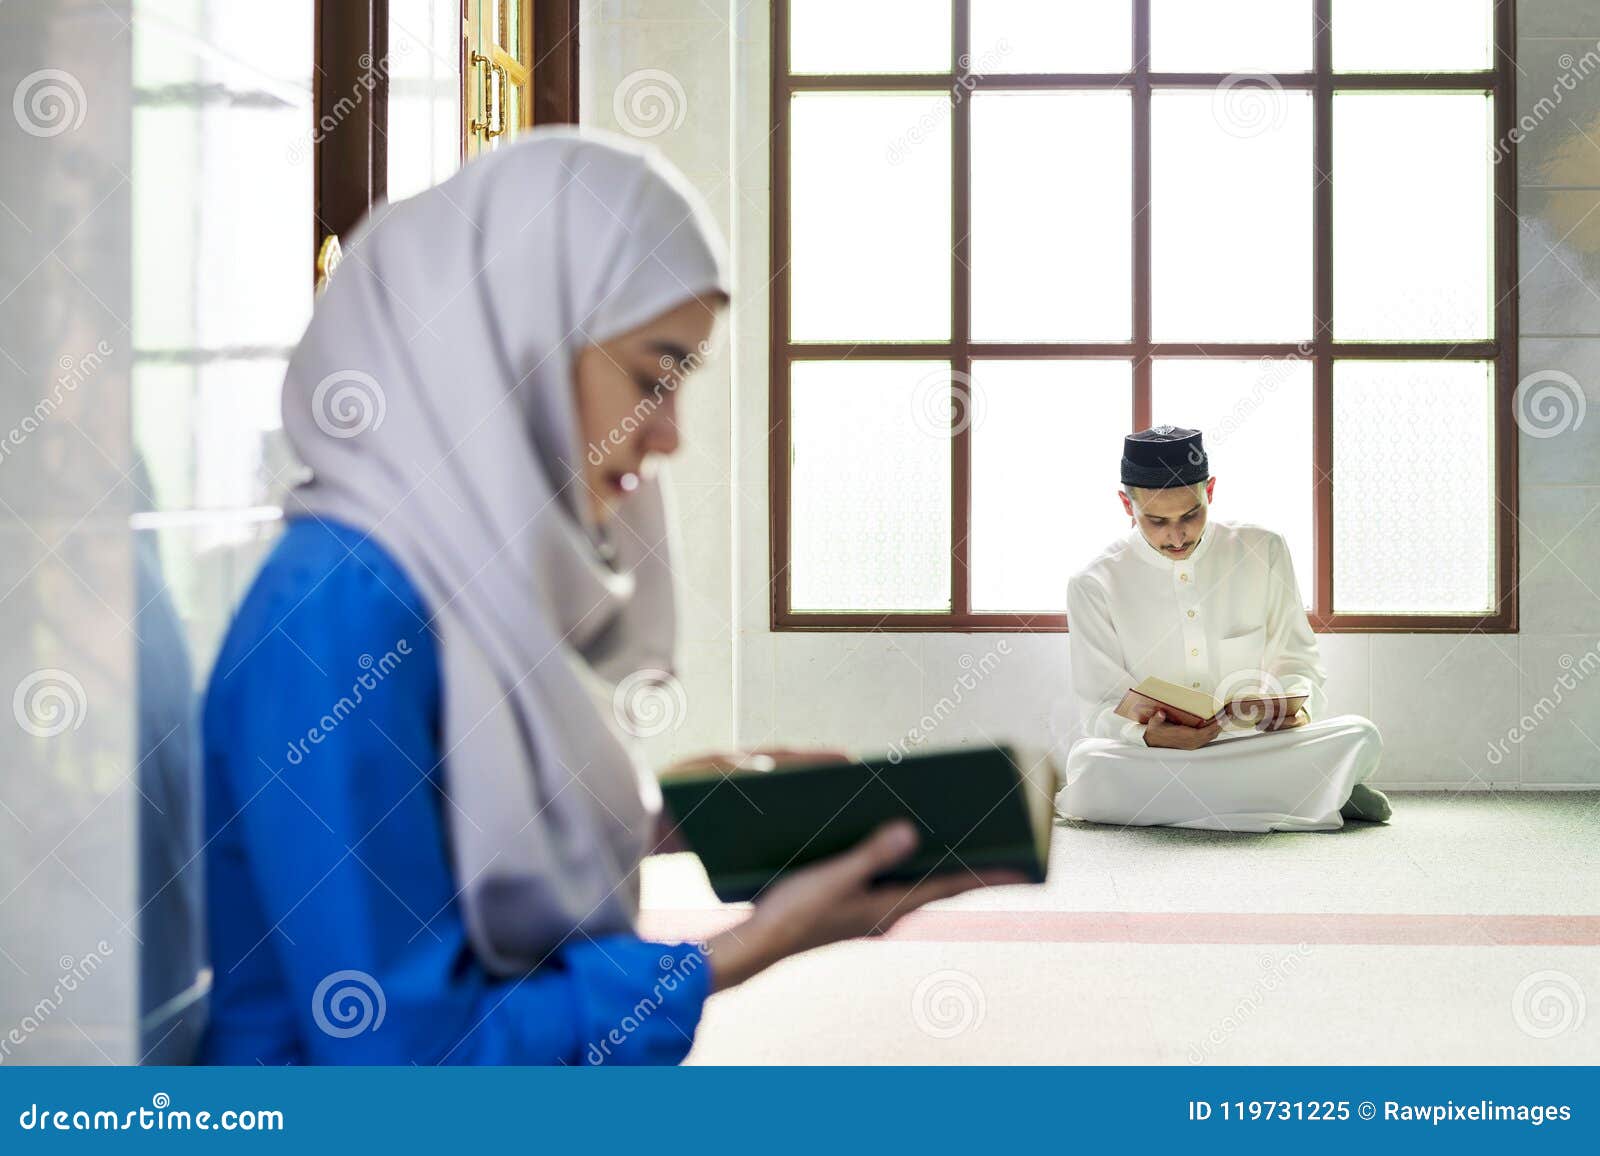 muslims reading from the quran